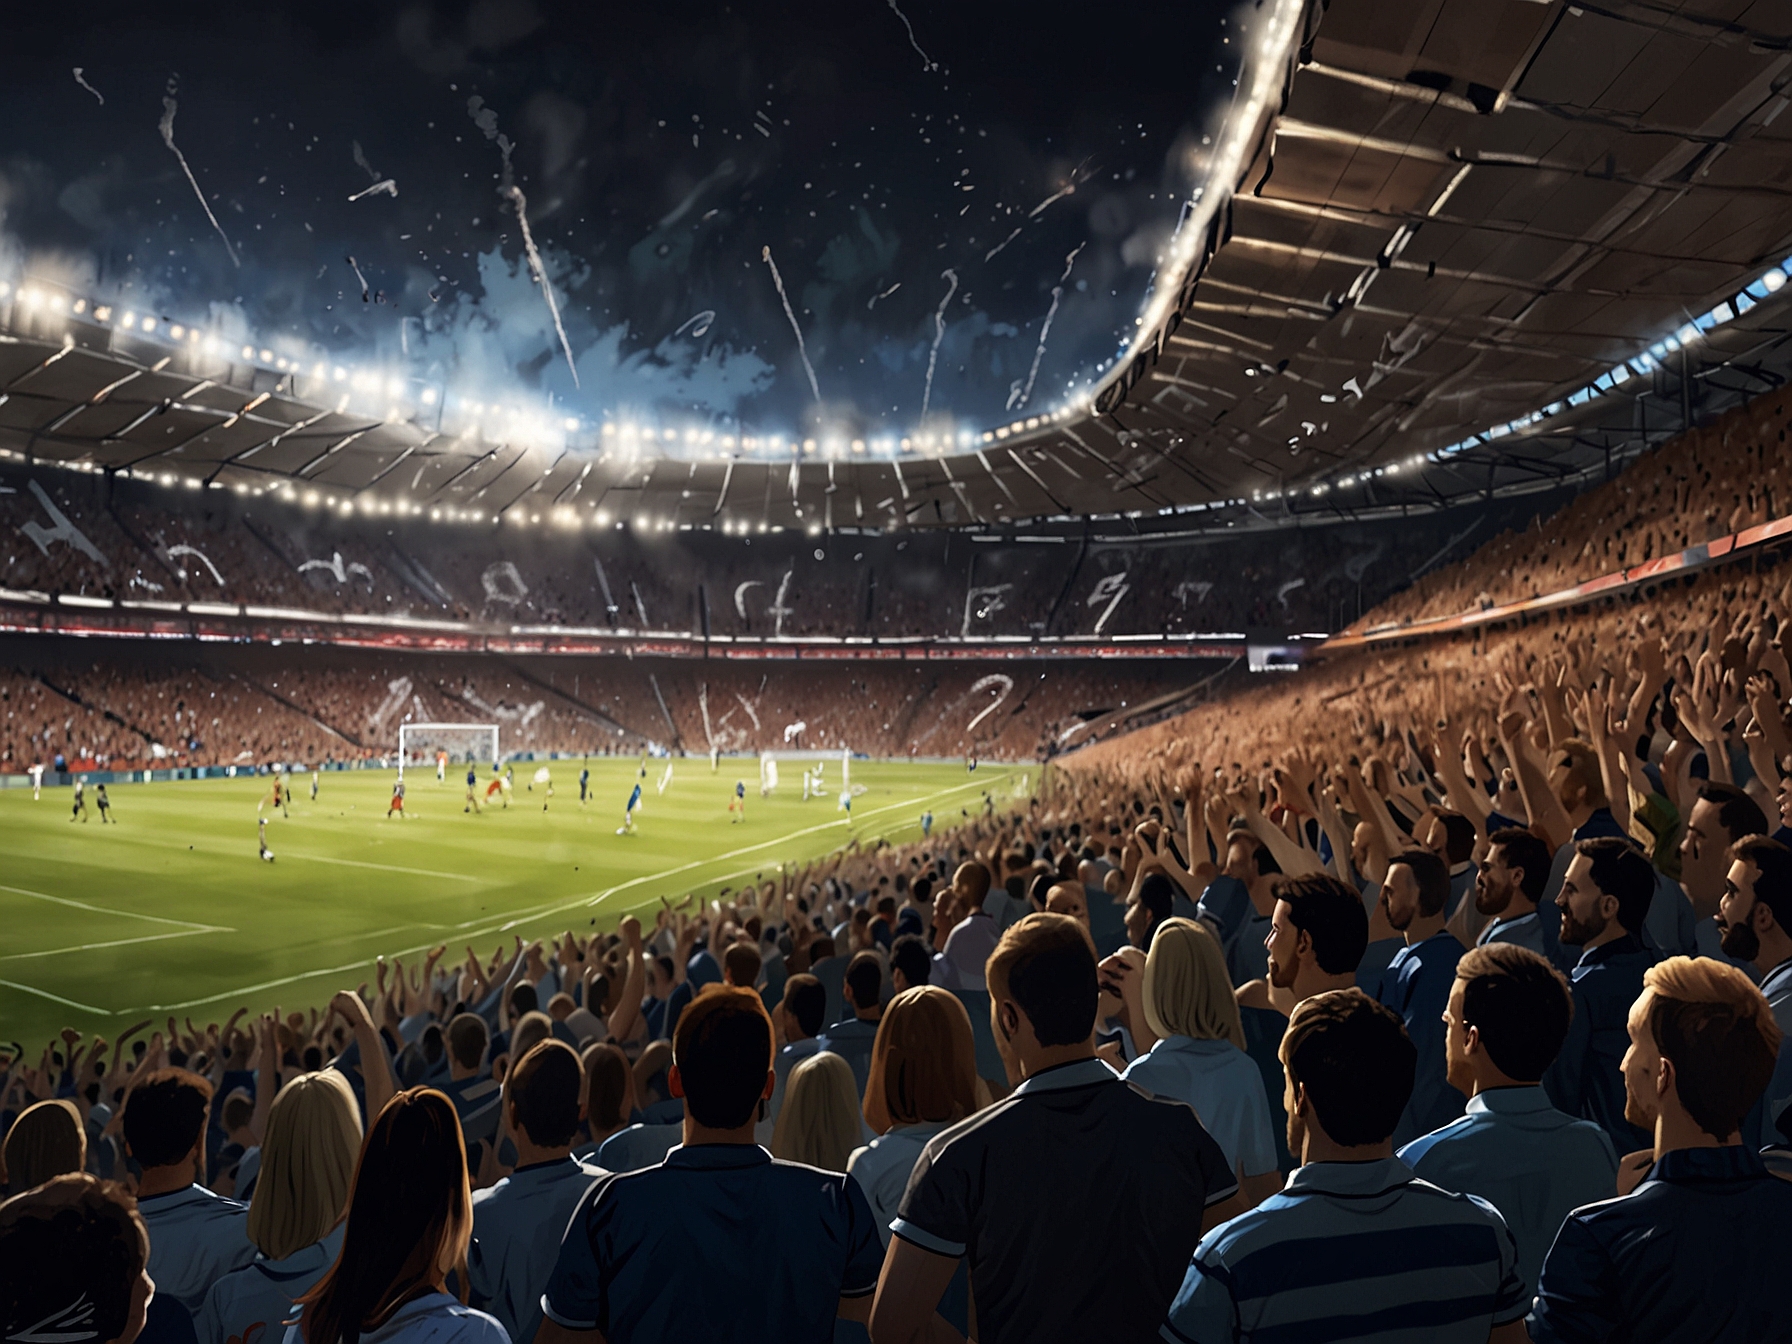 A packed stadium filled with passionate Scottish fans, their spirited chants and cheers creating an electrifying atmosphere to support the team in their pivotal Euro 2024 showdown.